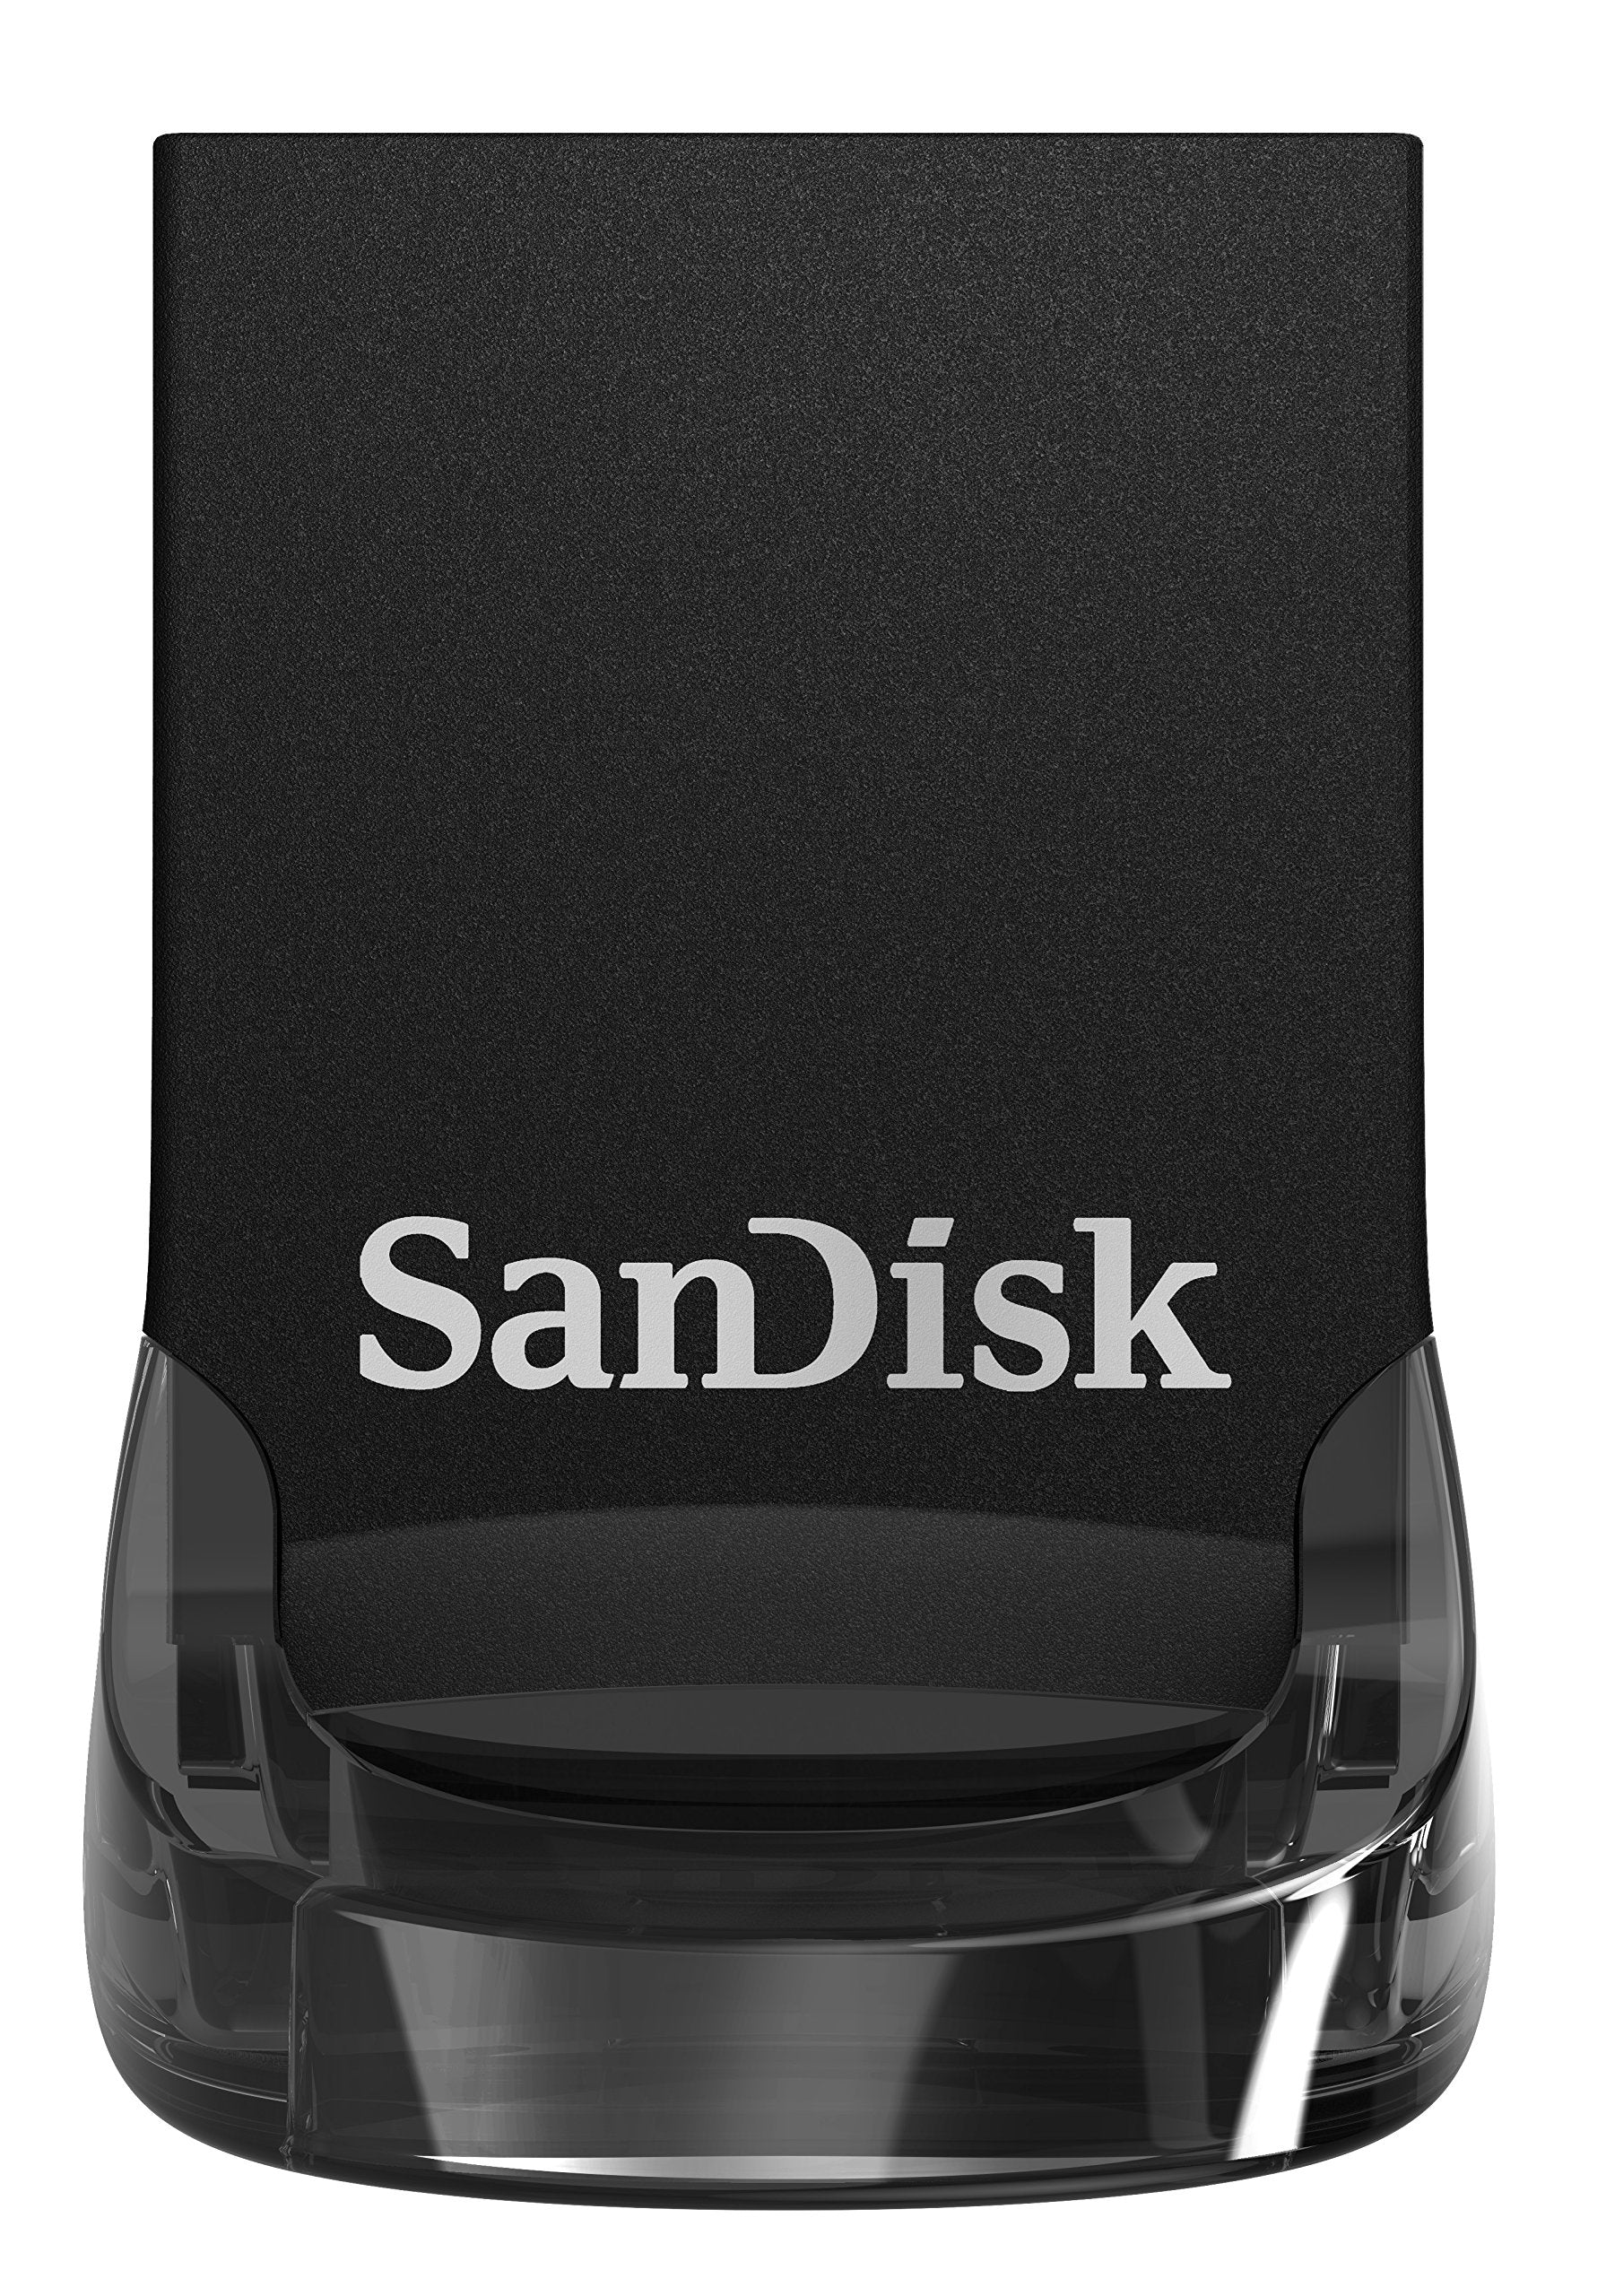 SanDisk Ultra Fit 256GB USB 3.1 Flash Drive up to 130MB/s read